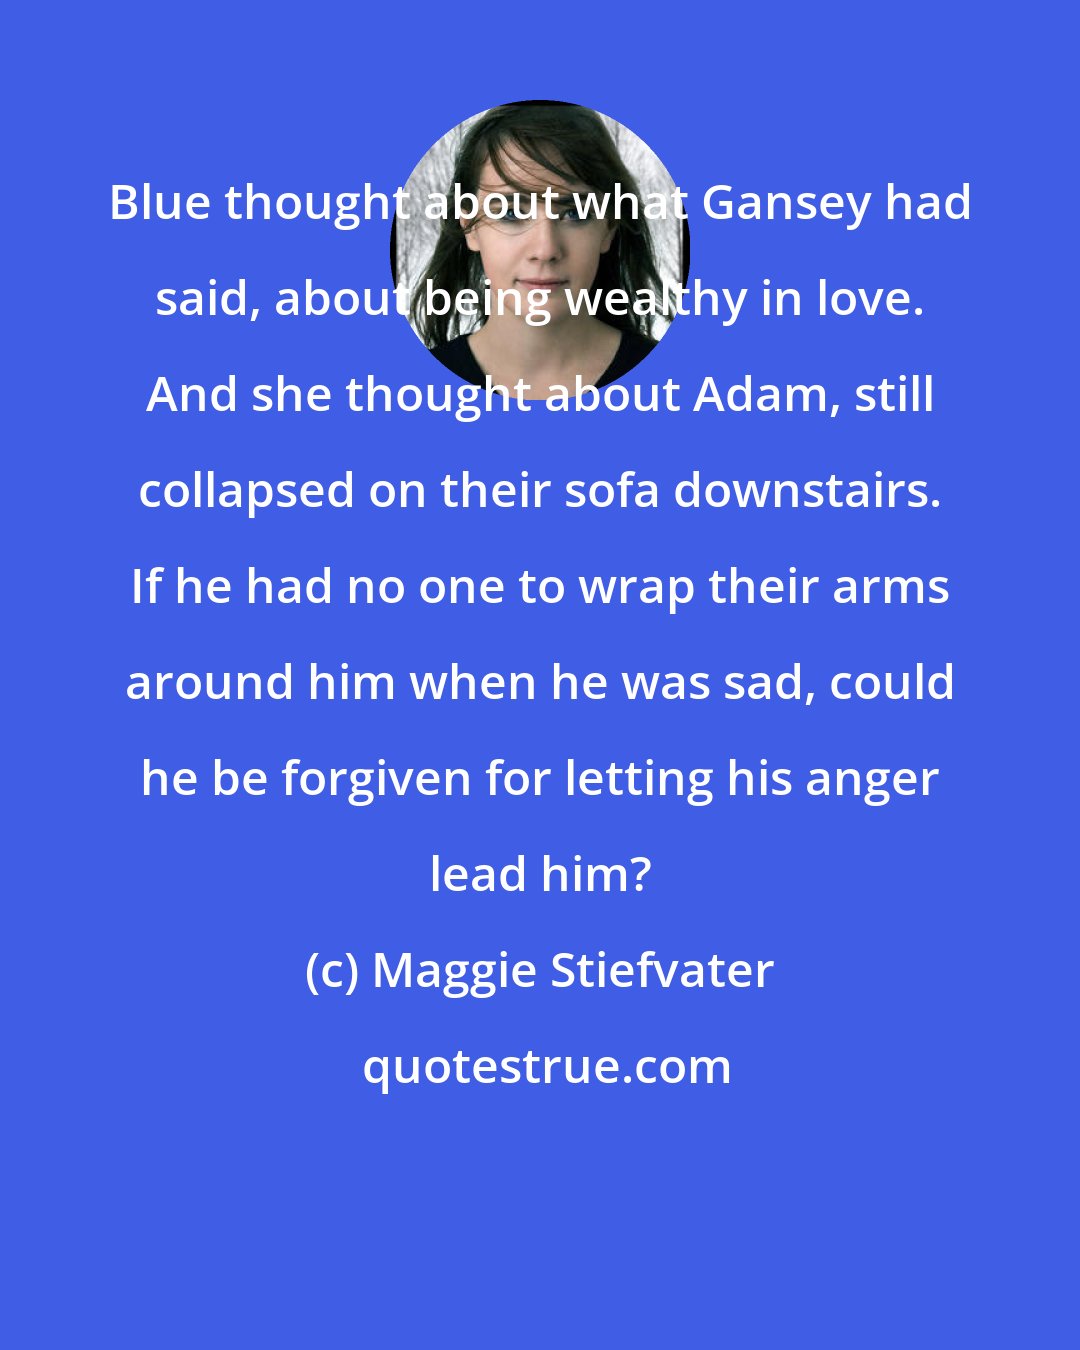 Maggie Stiefvater: Blue thought about what Gansey had said, about being wealthy in love. And she thought about Adam, still collapsed on their sofa downstairs. If he had no one to wrap their arms around him when he was sad, could he be forgiven for letting his anger lead him?